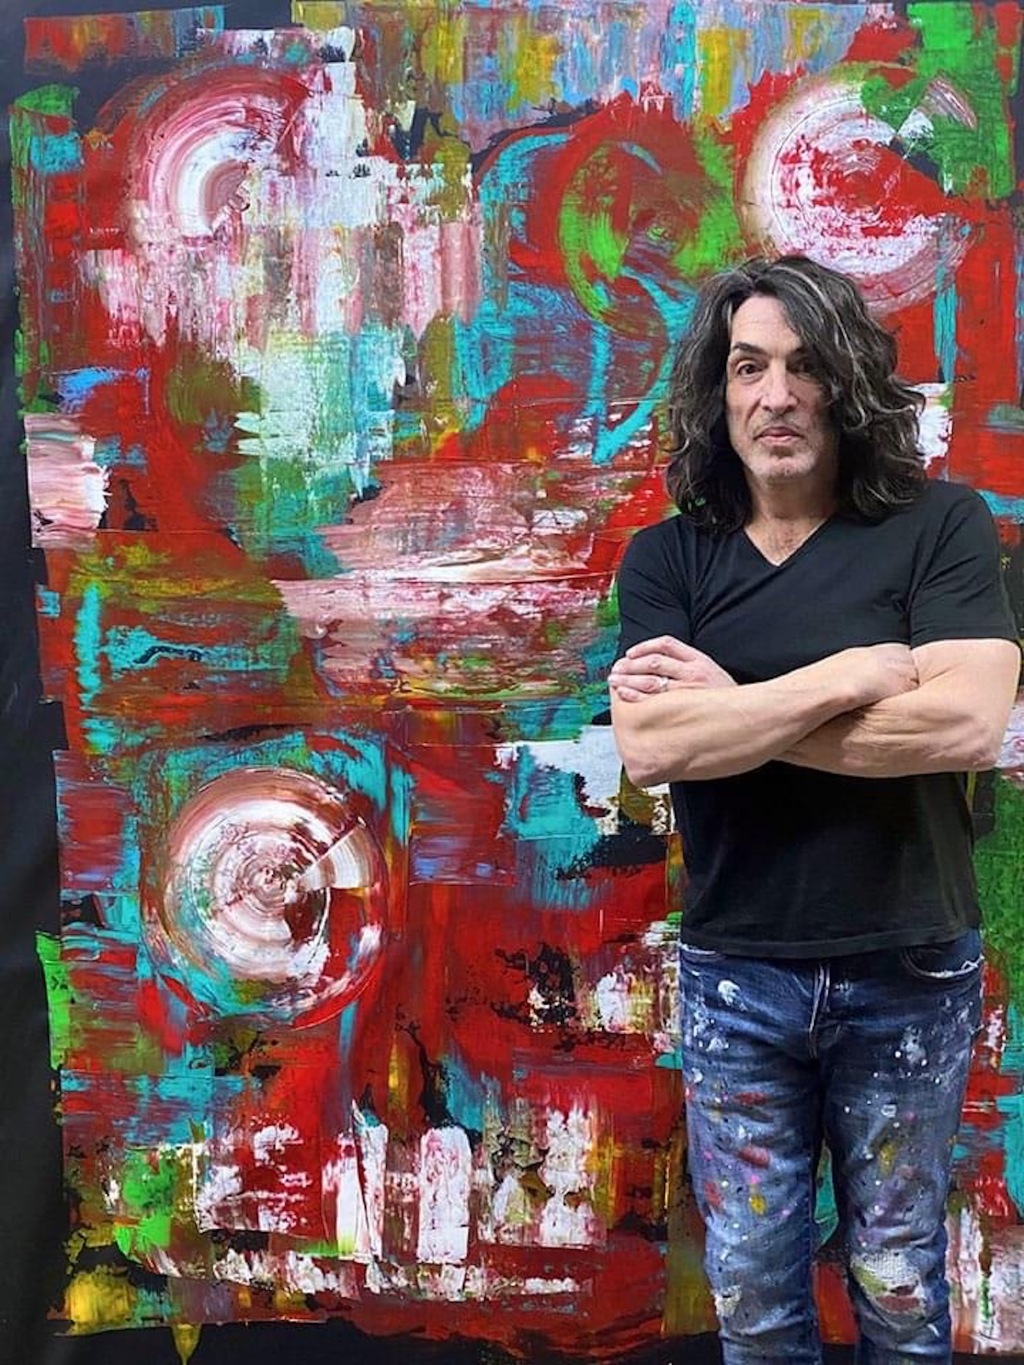 INTERVIEW: KISS Frontman Paul Stanley on art and the future of KISS, which he calls “finite.”